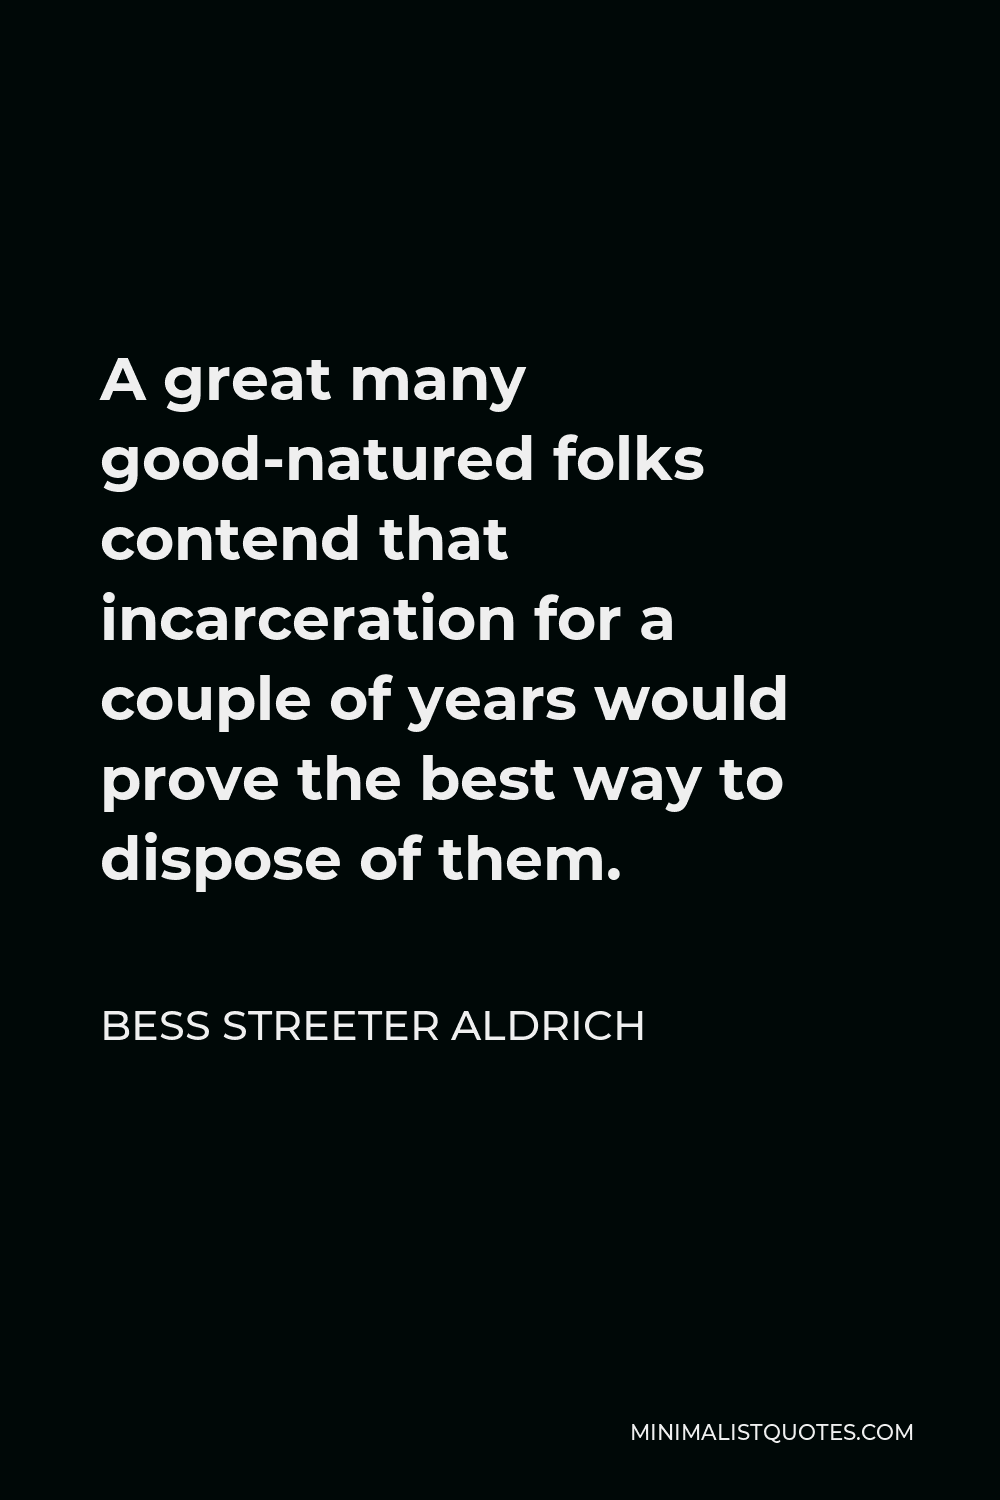 Bess Streeter Aldrich Quote - A great many good-natured folks contend that incarceration for a couple of years would prove the best way to dispose of them.